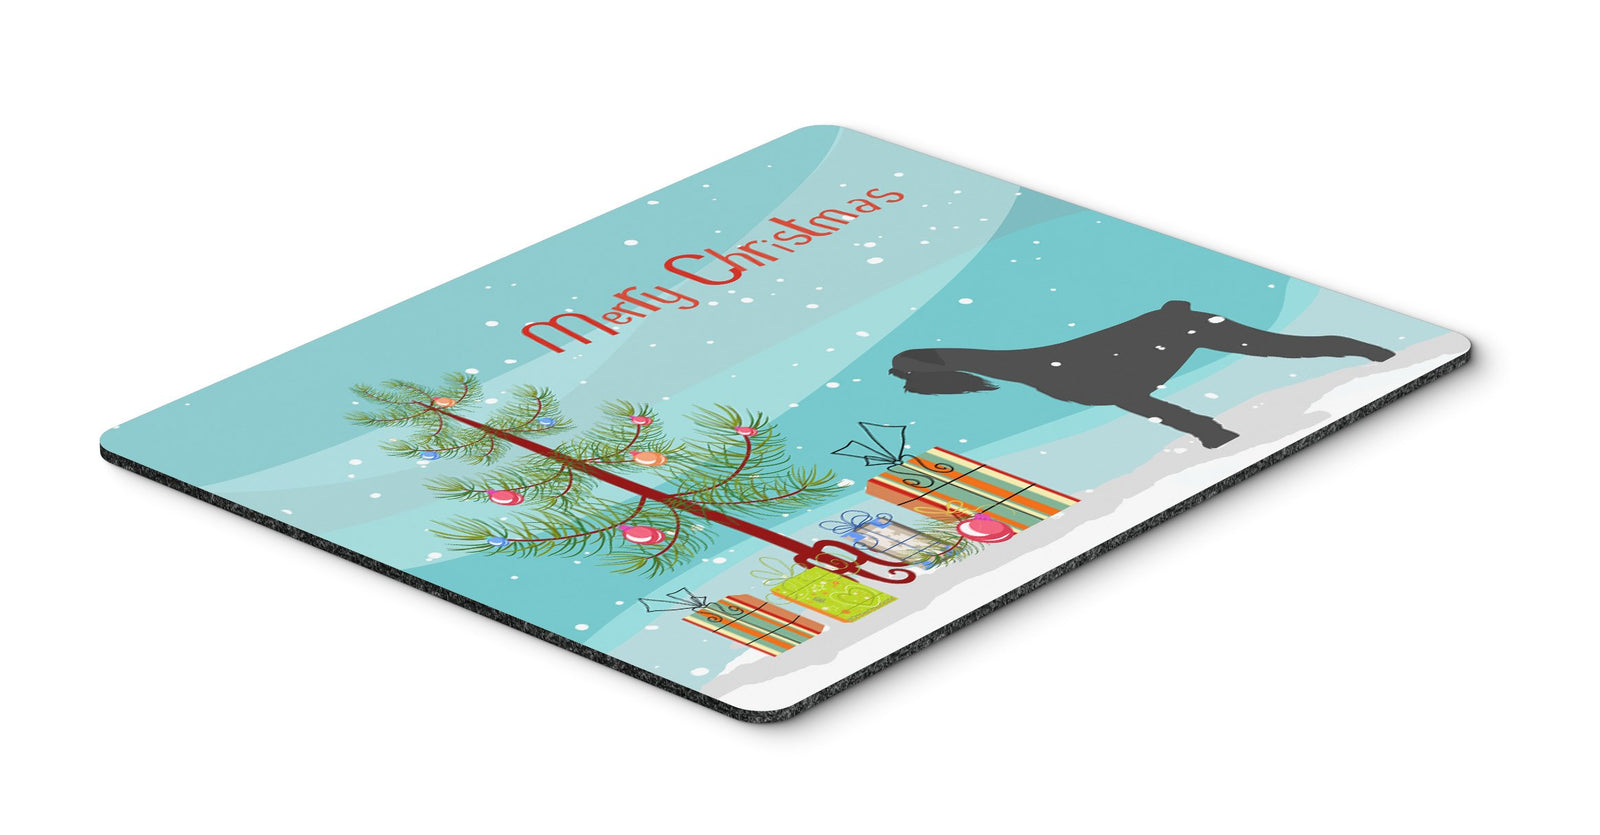 Giant Schnauzer Merry Christmas Tree Mouse Pad, Hot Pad or Trivet by Caroline's Treasures